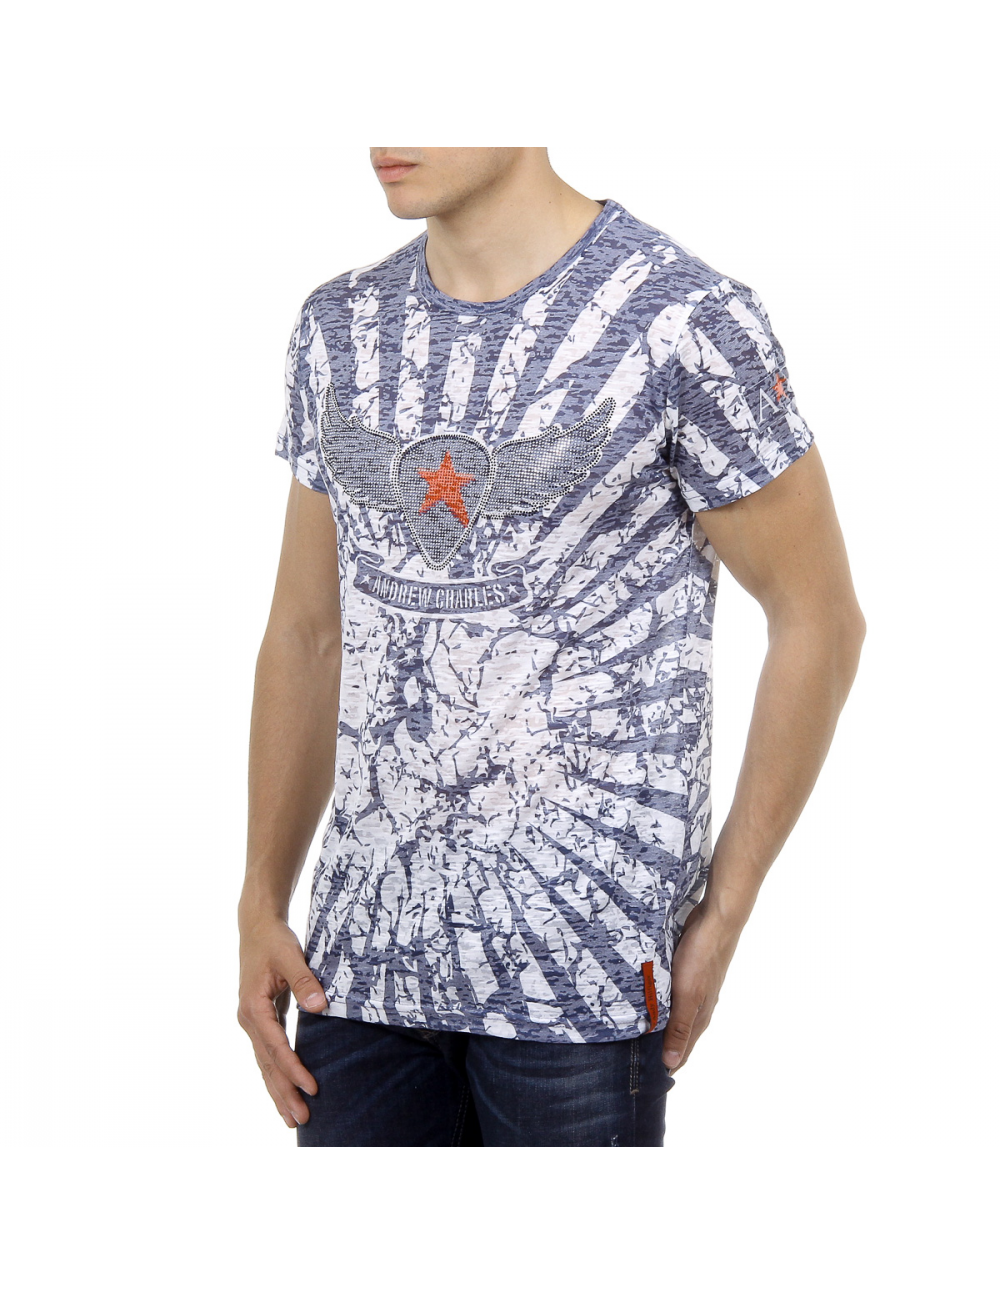 Andrew Charles Mens T-Shirt Short Sleeves Round Neck Blue CALEB - YuppyCollections